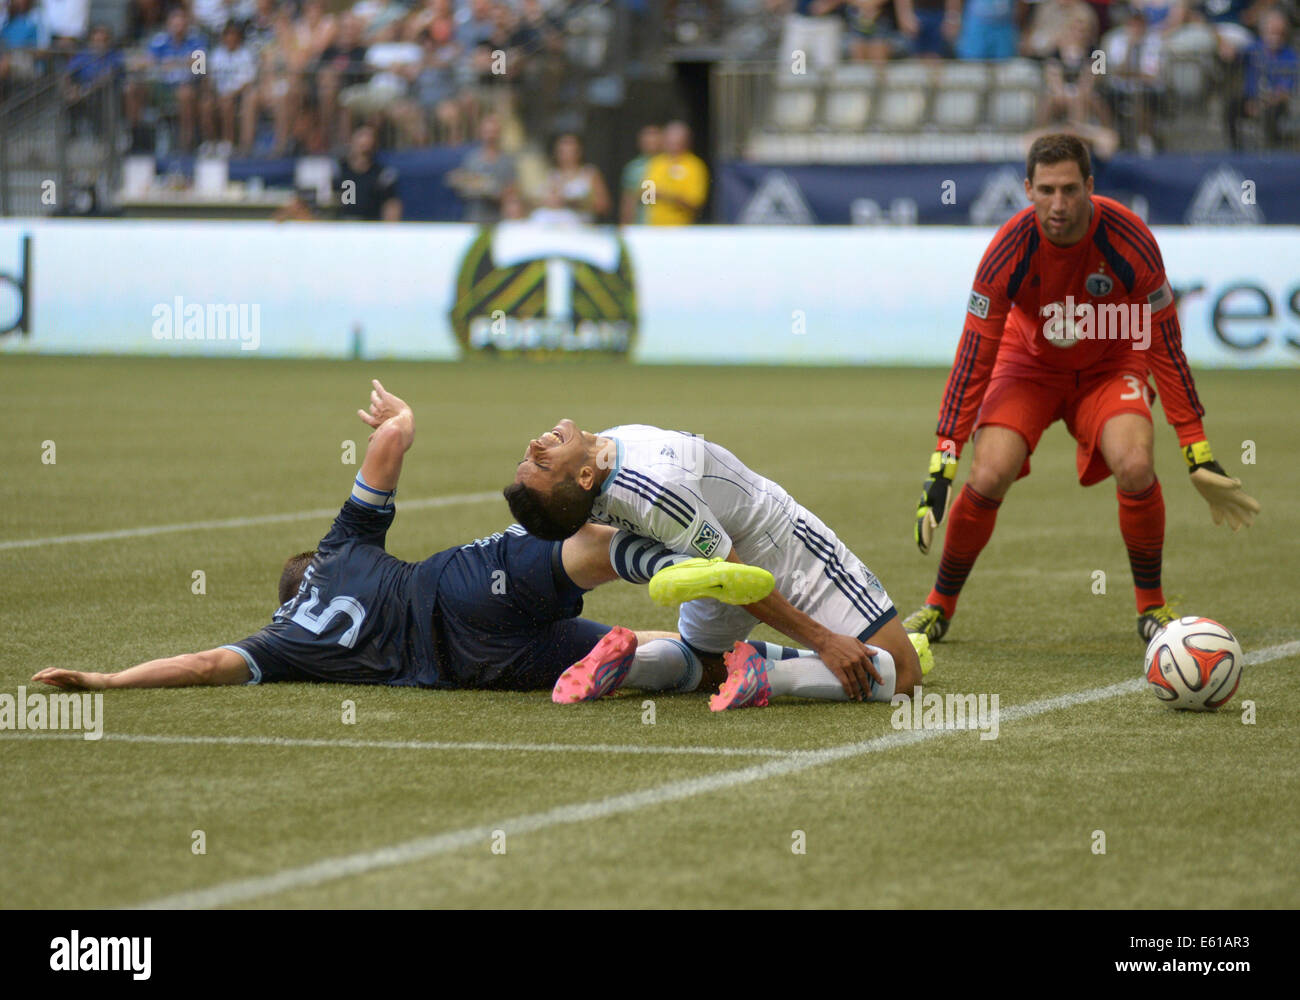 Vancouver, Canada. 10th Aug, 2014. Sporting Kansas City's Matt Besler (L) defends Vancouver Whitecaps' Sebastian Fernandez (C) from scoring a goal during their MLS soccer game at BC Place in Vancouver, Canada, on Aug. 10, 2014. Vancouver Whitecaps defeated Sporting KC by 2-0. © Sergei Bachlakov/Xinhua/Alamy Live News Stock Photo